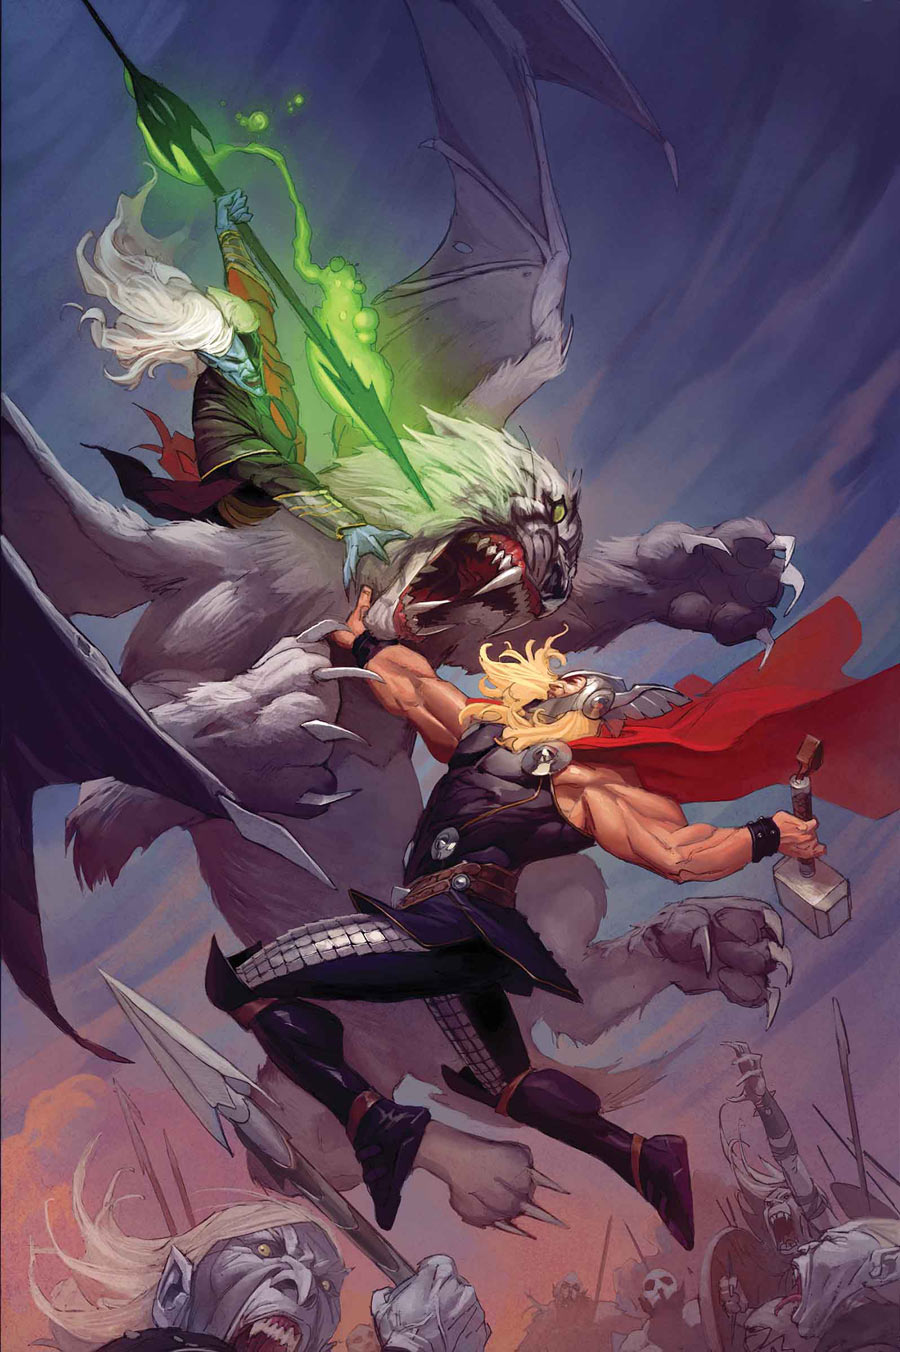 Thor: God Of Thunder Backgrounds, Compatible - PC, Mobile, Gadgets| 900x1352 px